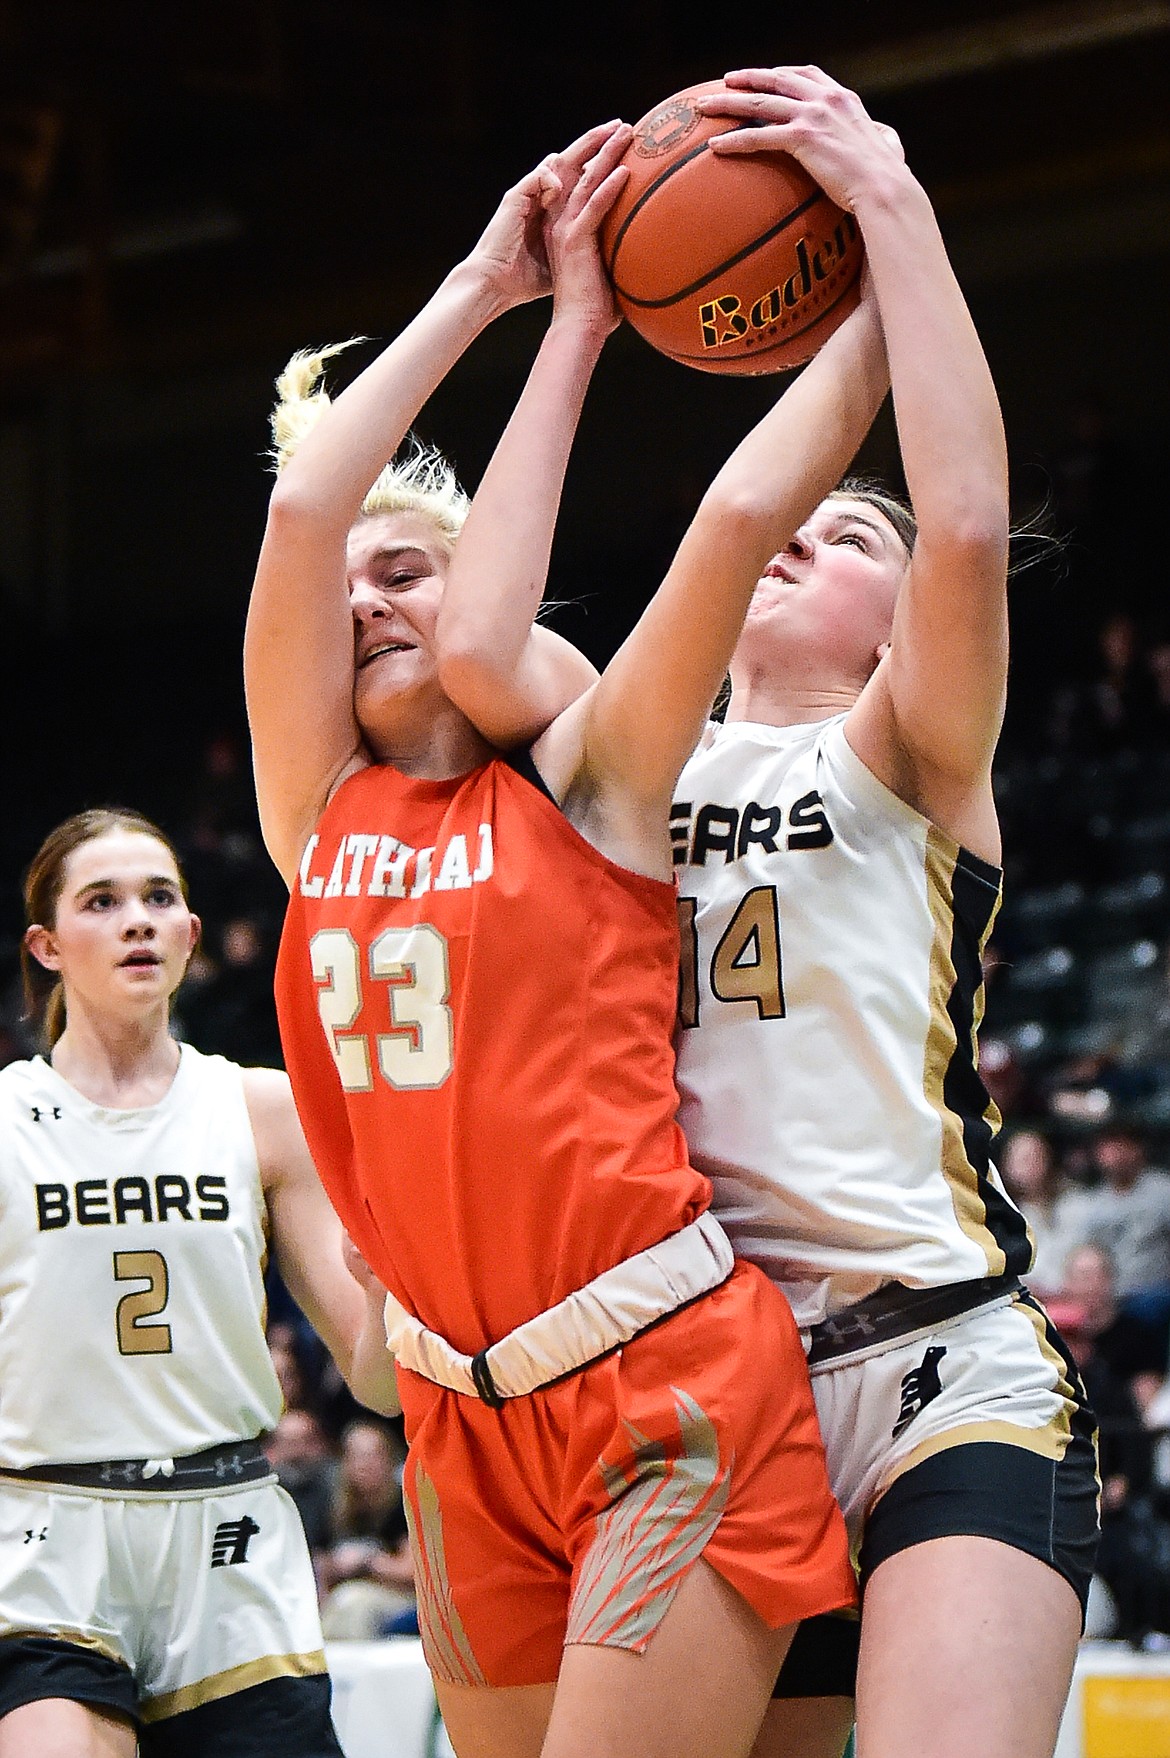 Flathead's Celie VandenBosch battles for a rebound with Billings West's Halle Haber (14) in the second half of the girls' Class AA state basketball championship at the Butte Civic Center on Saturday, March 11. (Casey Kreider/Daily Inter Lake)